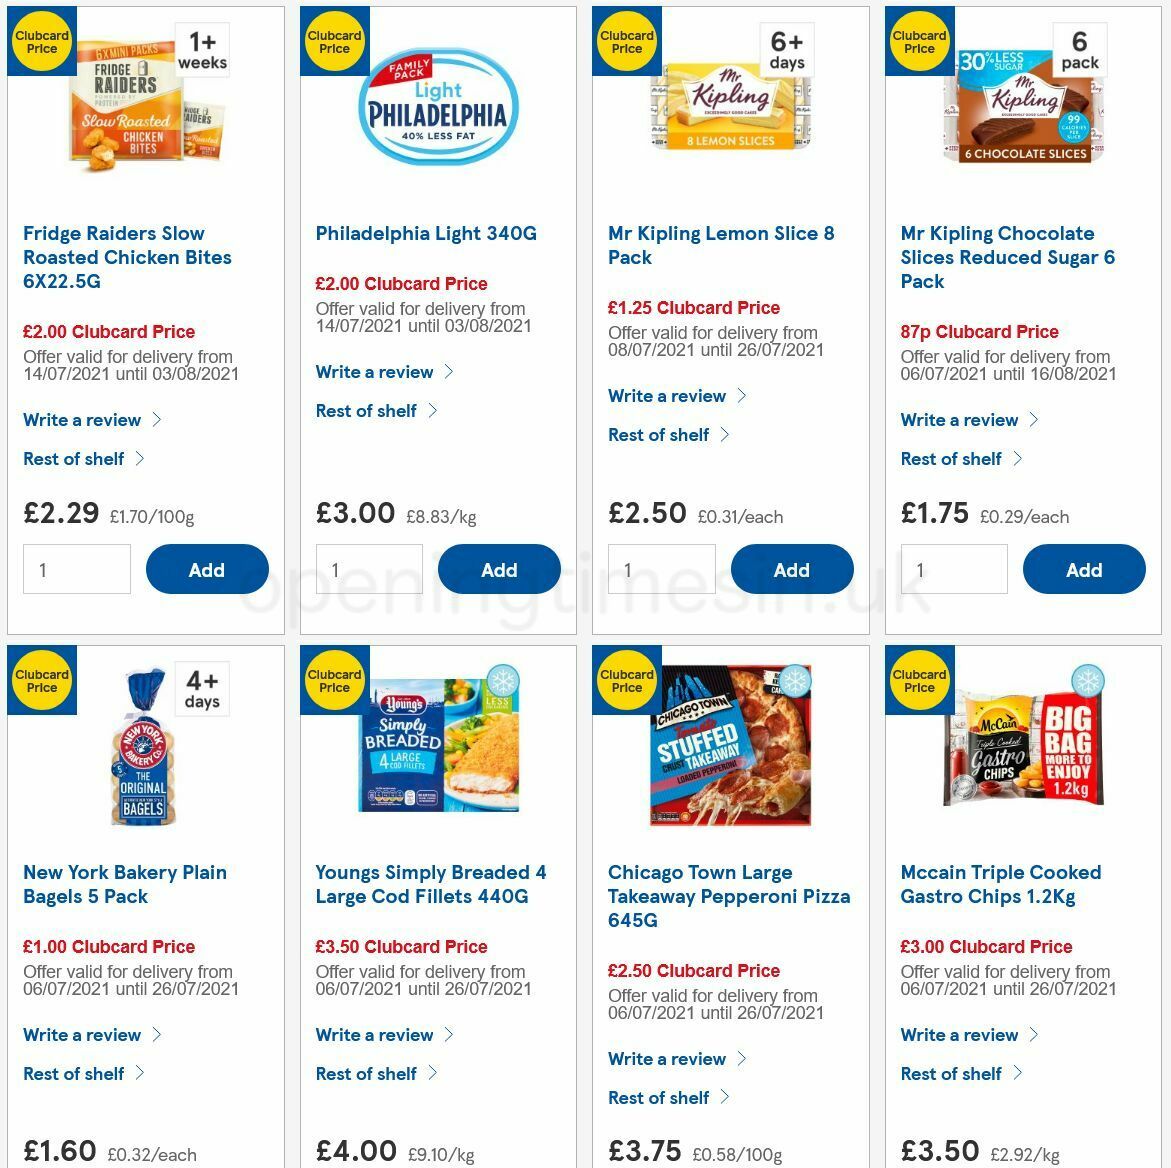 TESCO Offers from 21 July